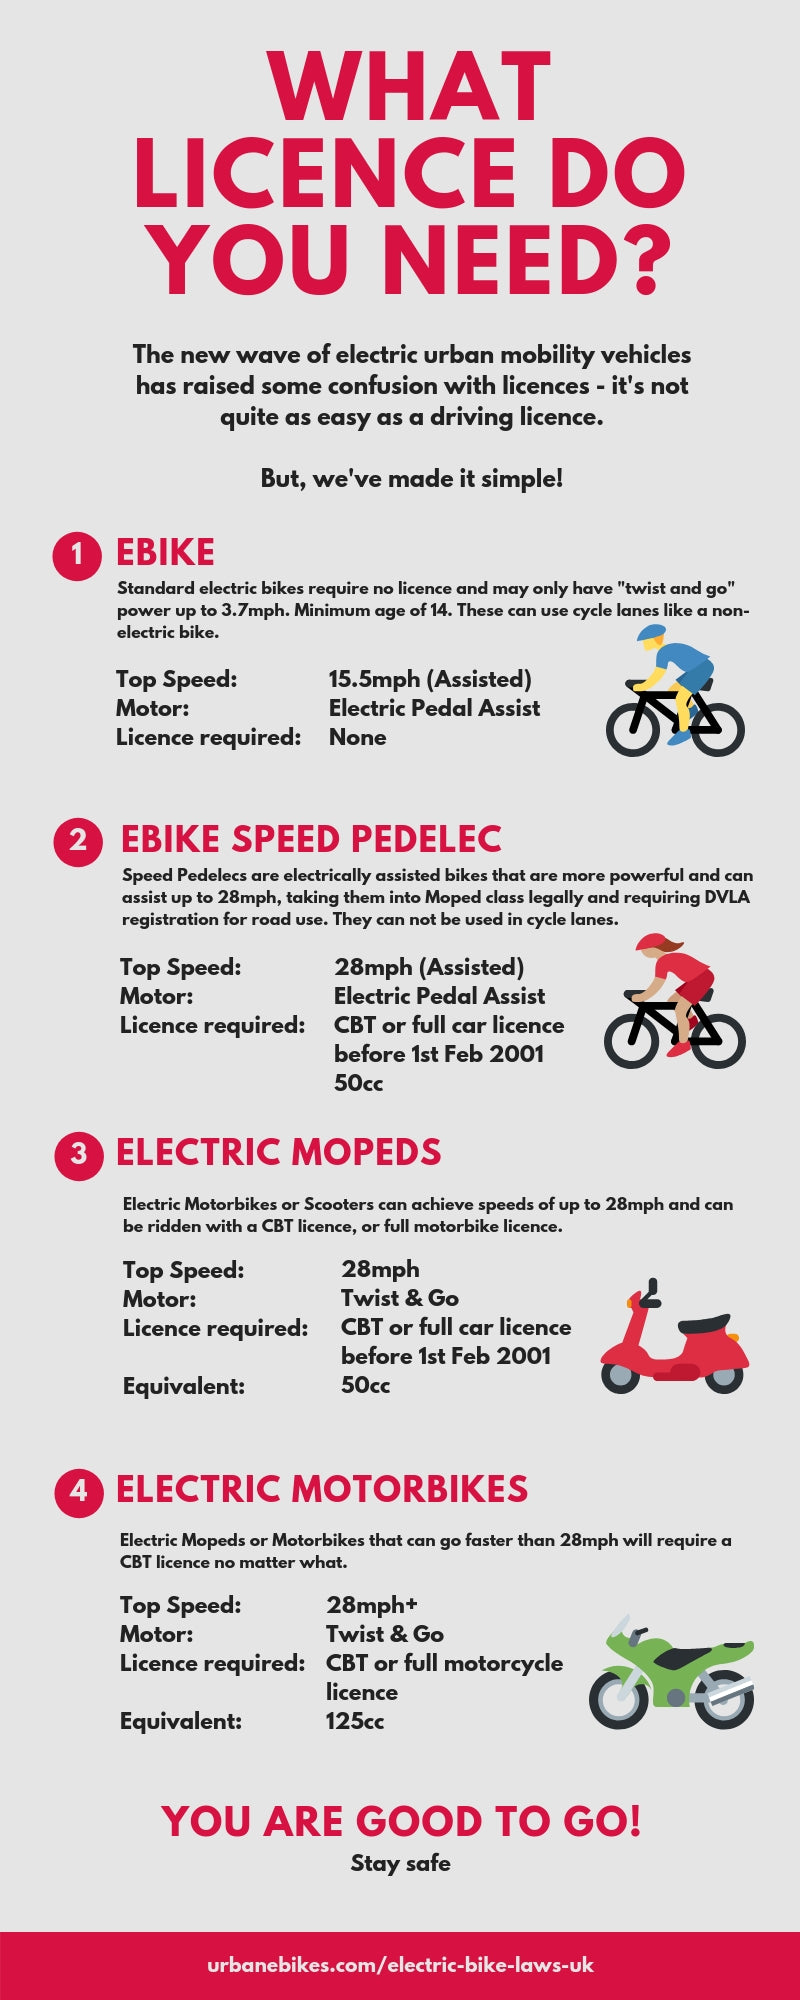 What Licence Do You Need For An Electric Motorcycle - Electric Bike Info Licence 1200x